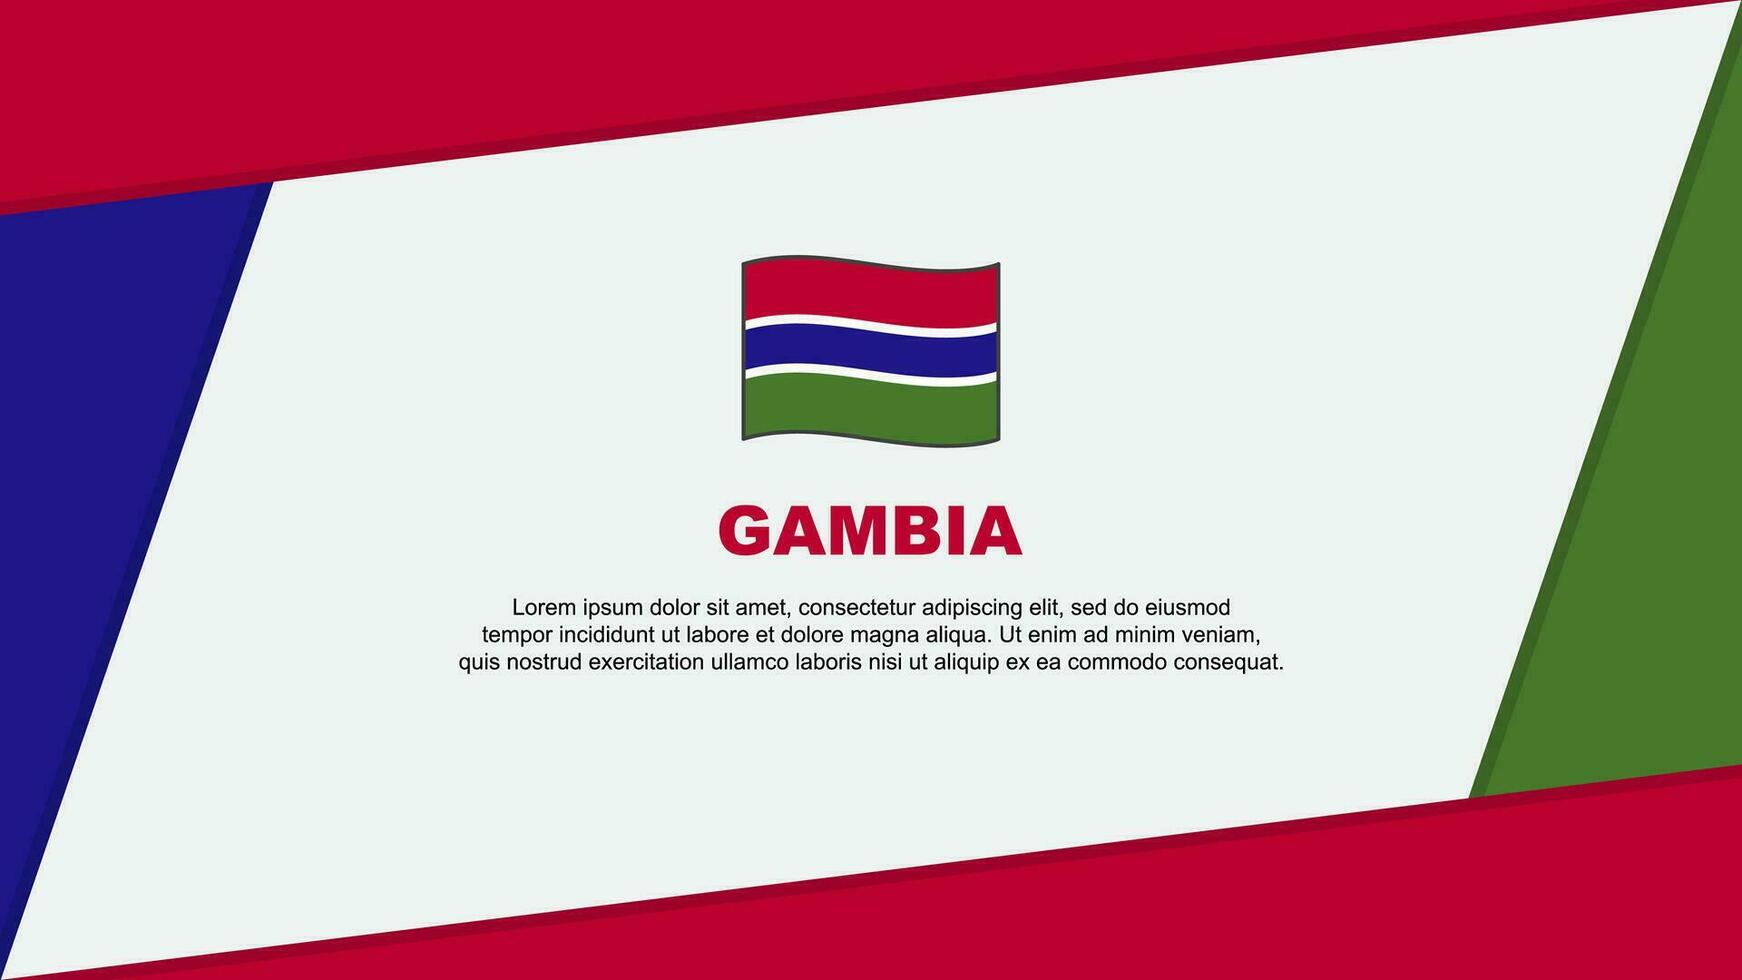 Gambia Flag Abstract Background Design Template. Gambia Independence Day Banner Cartoon Vector Illustration. Gambia Banner